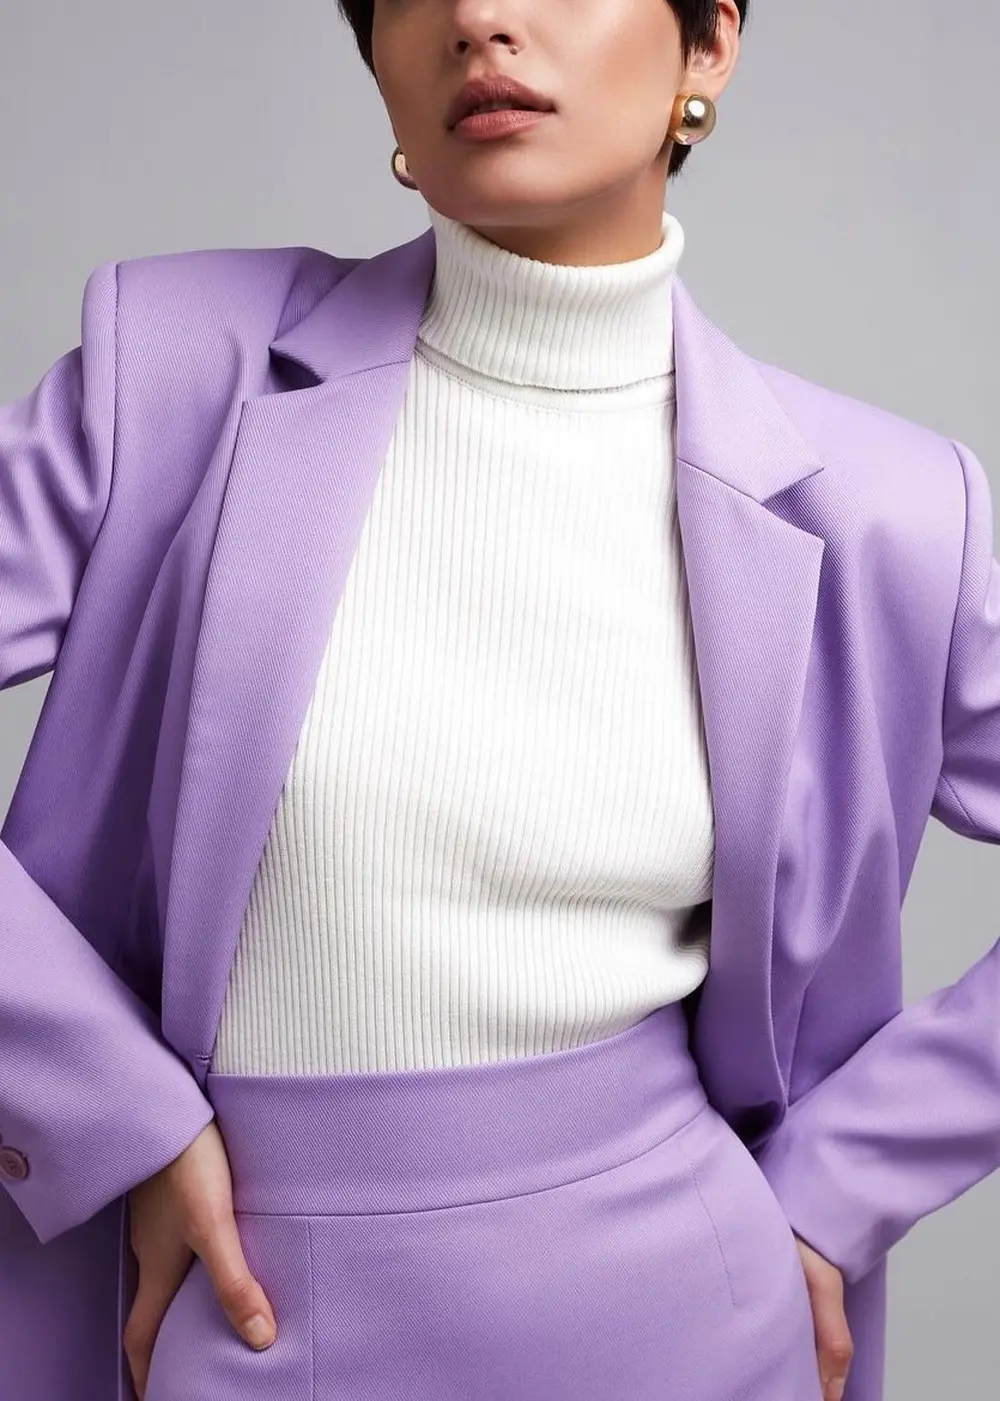 lilac suit paired with white turtleneck